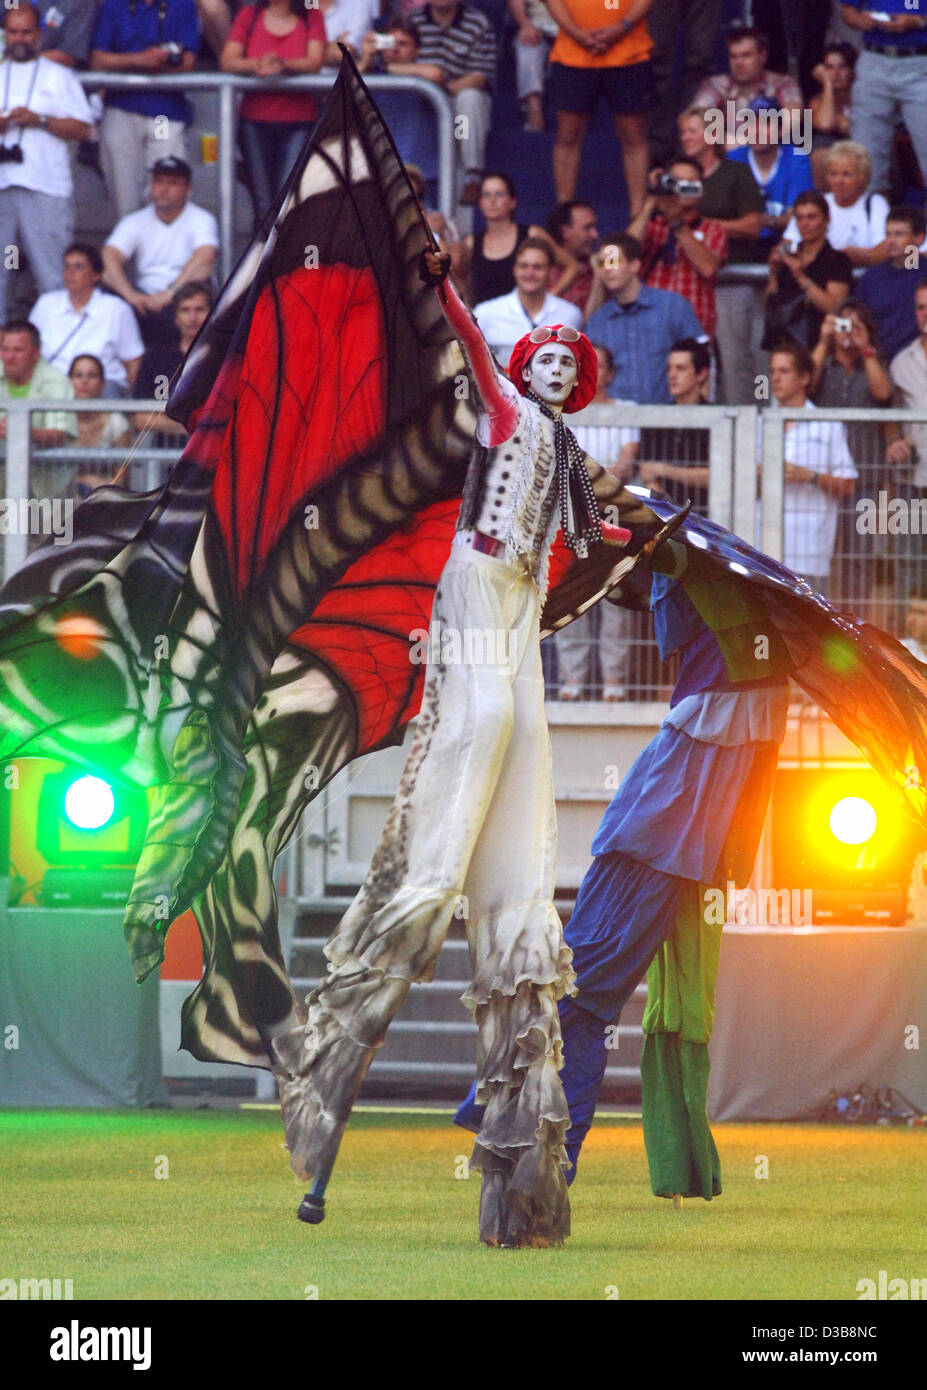 (dpa) - Actors dressed as butterflies perform on stilts during the opening of the World Games at the MSV Arena in Duisburg, Germany, 14 July 2005. The World Games sports event was officially openend with a two hour long ceremony. The World Games feature 40 non-olympic disciplines, runnig from 14 Jul Stock Photo